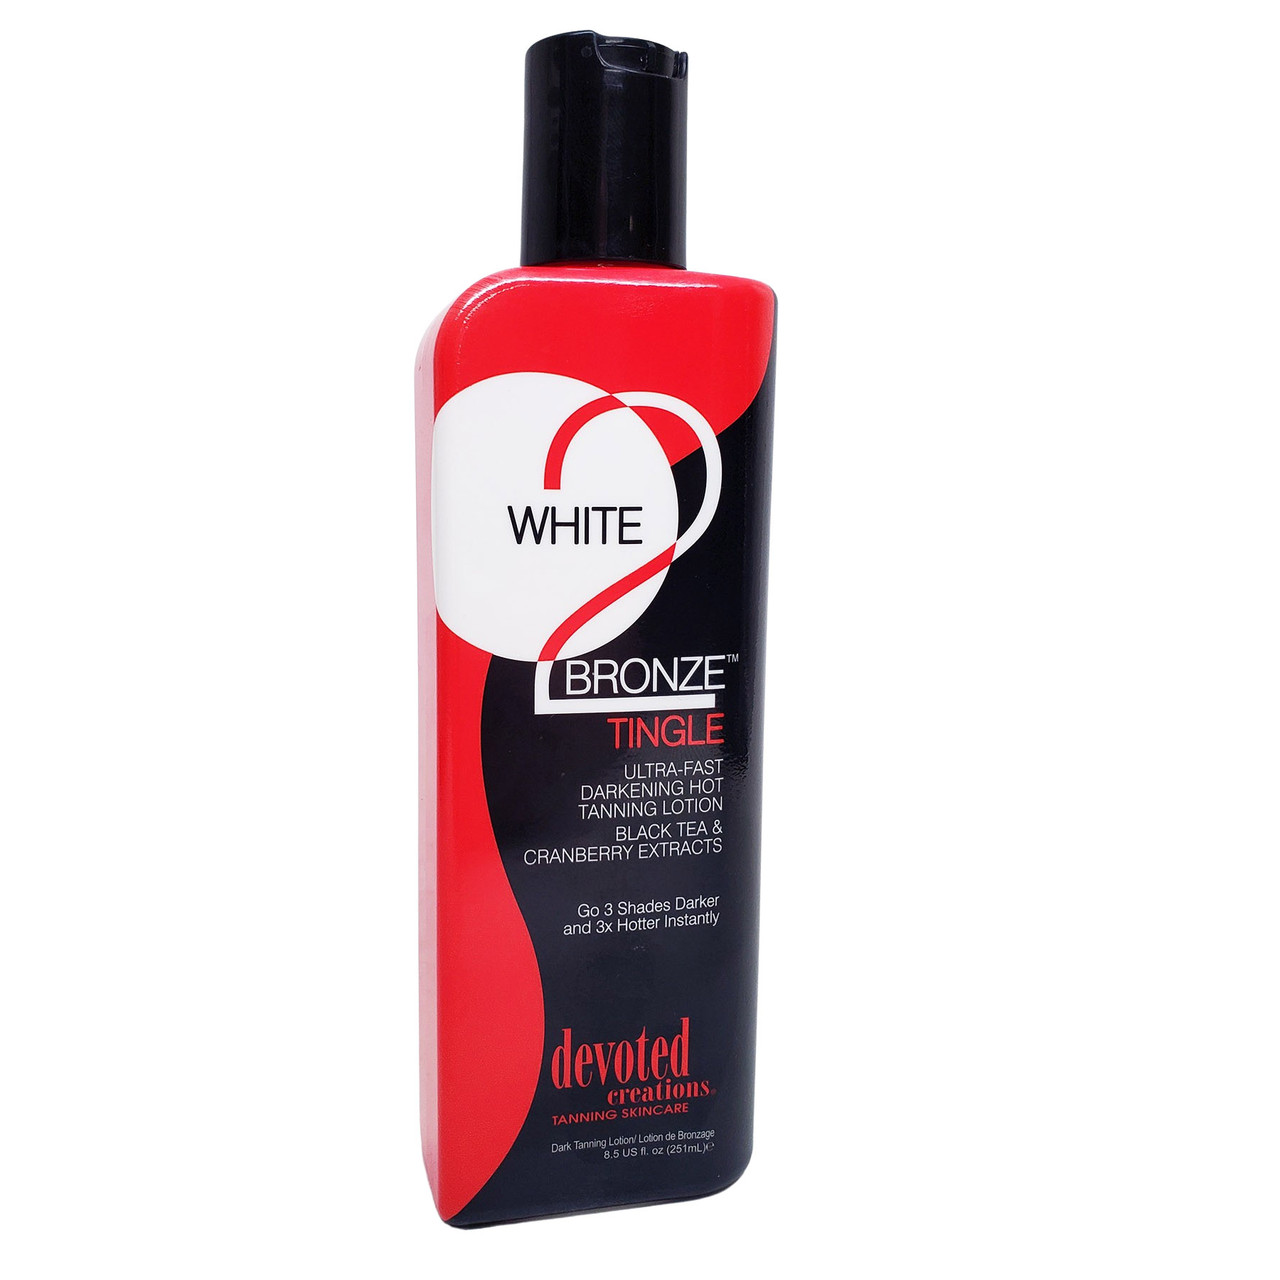 Devoted Creations WHITE 2 BRONZE TINGLE Hot Tanning Lotion - 8.5 oz.